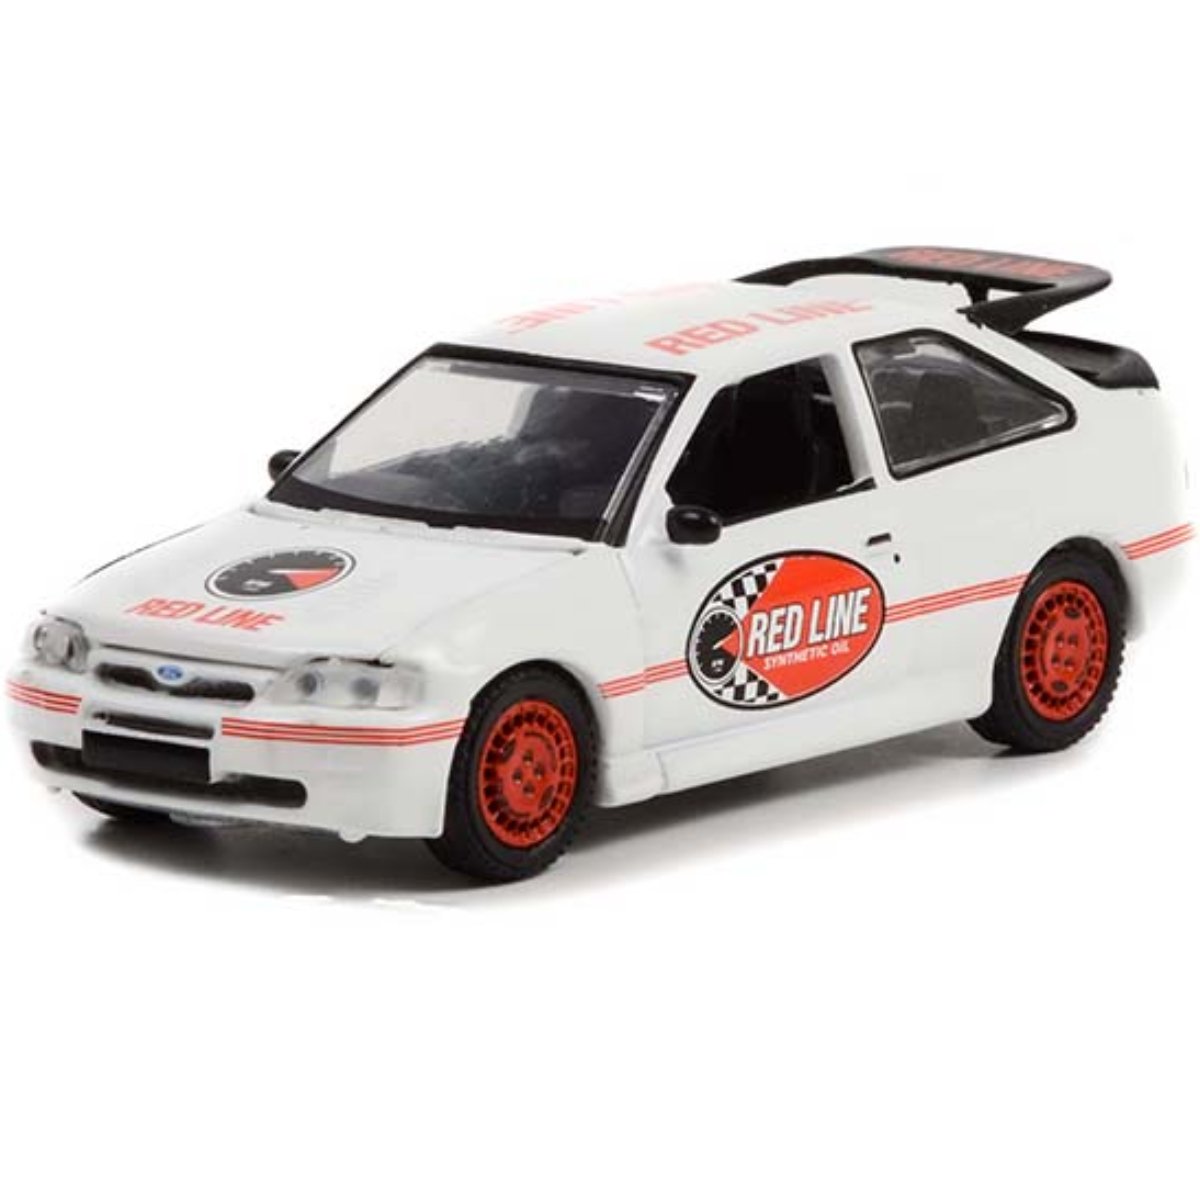 Greenlight 1995 Ford Escort RS Cosworth - 1:64 Scale